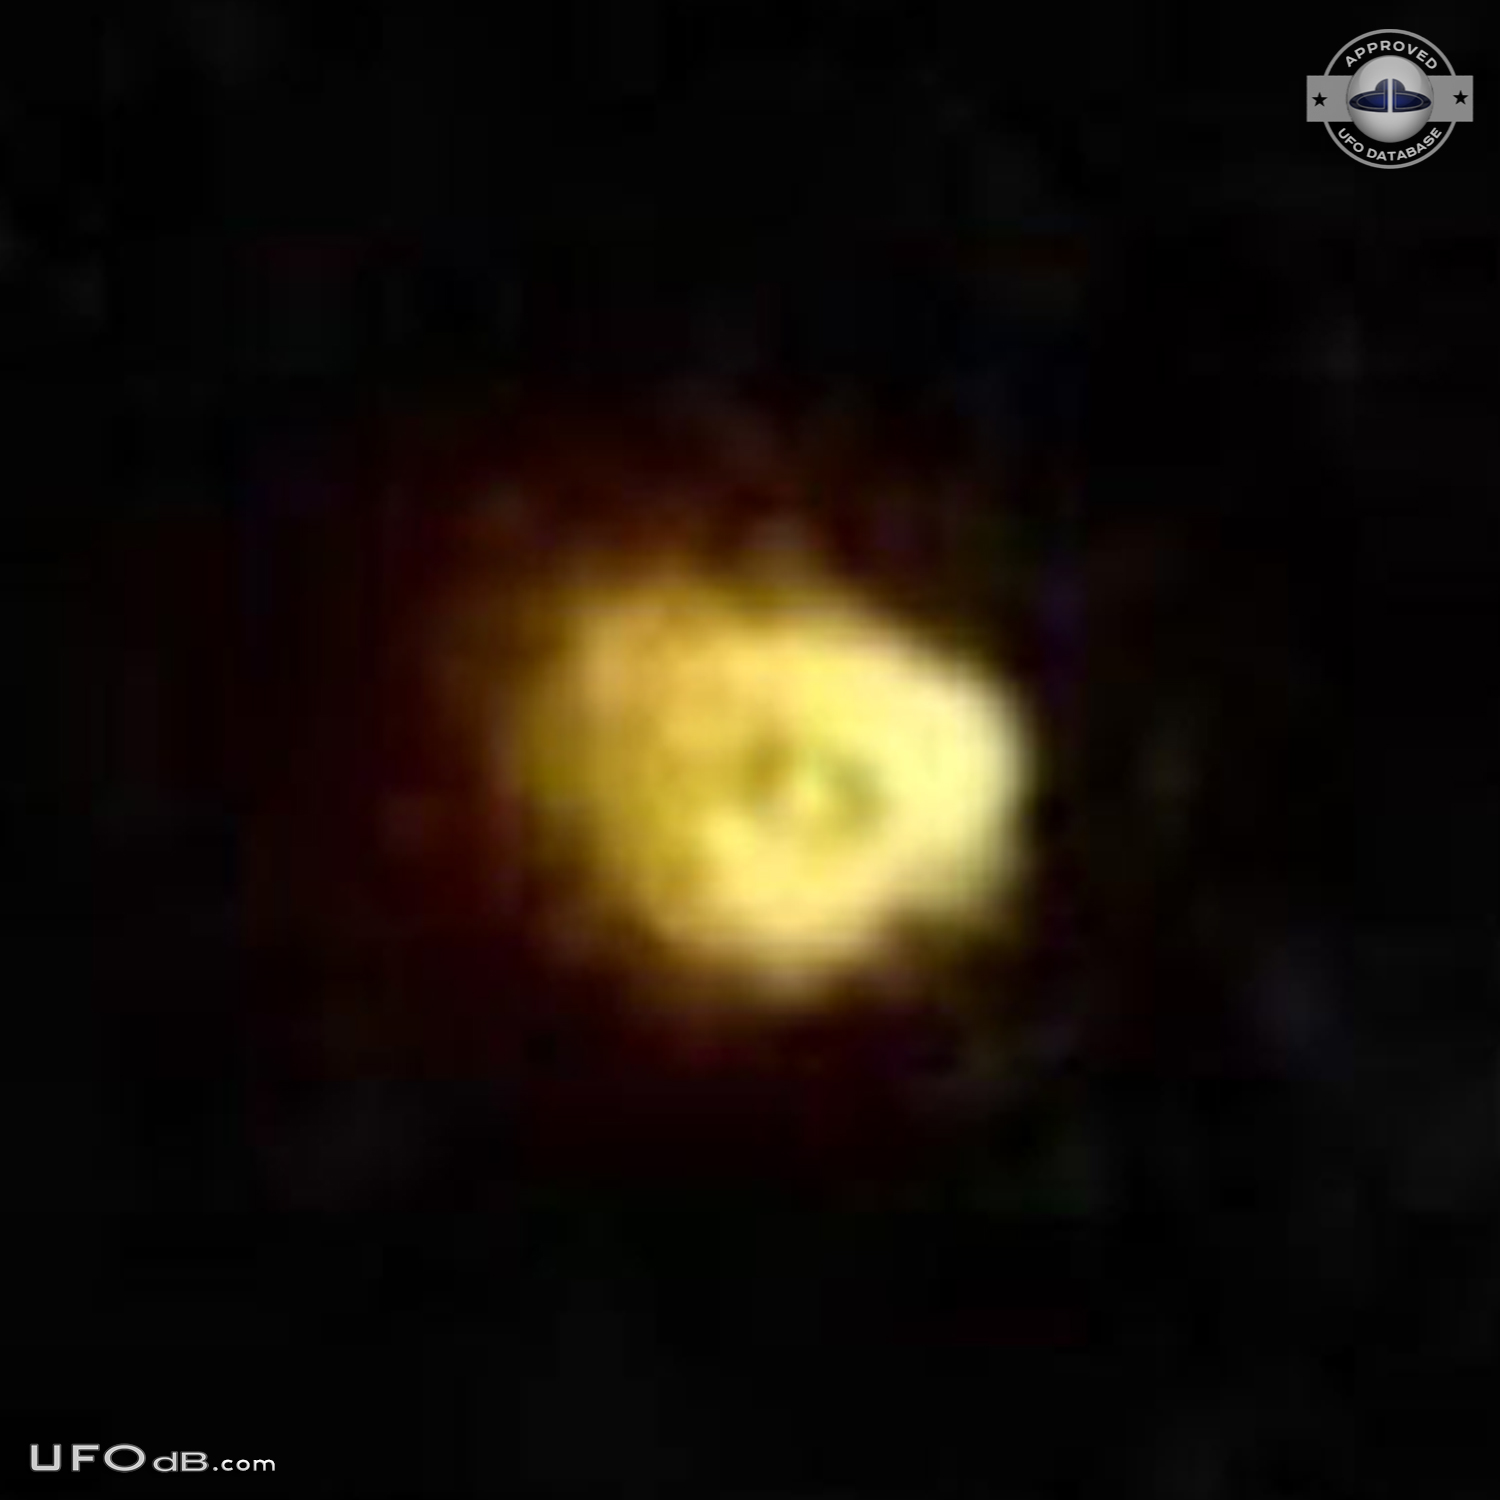 UFO picture with 3 firebals in a triangular formation - Argentina 2011 UFO Picture #408-4